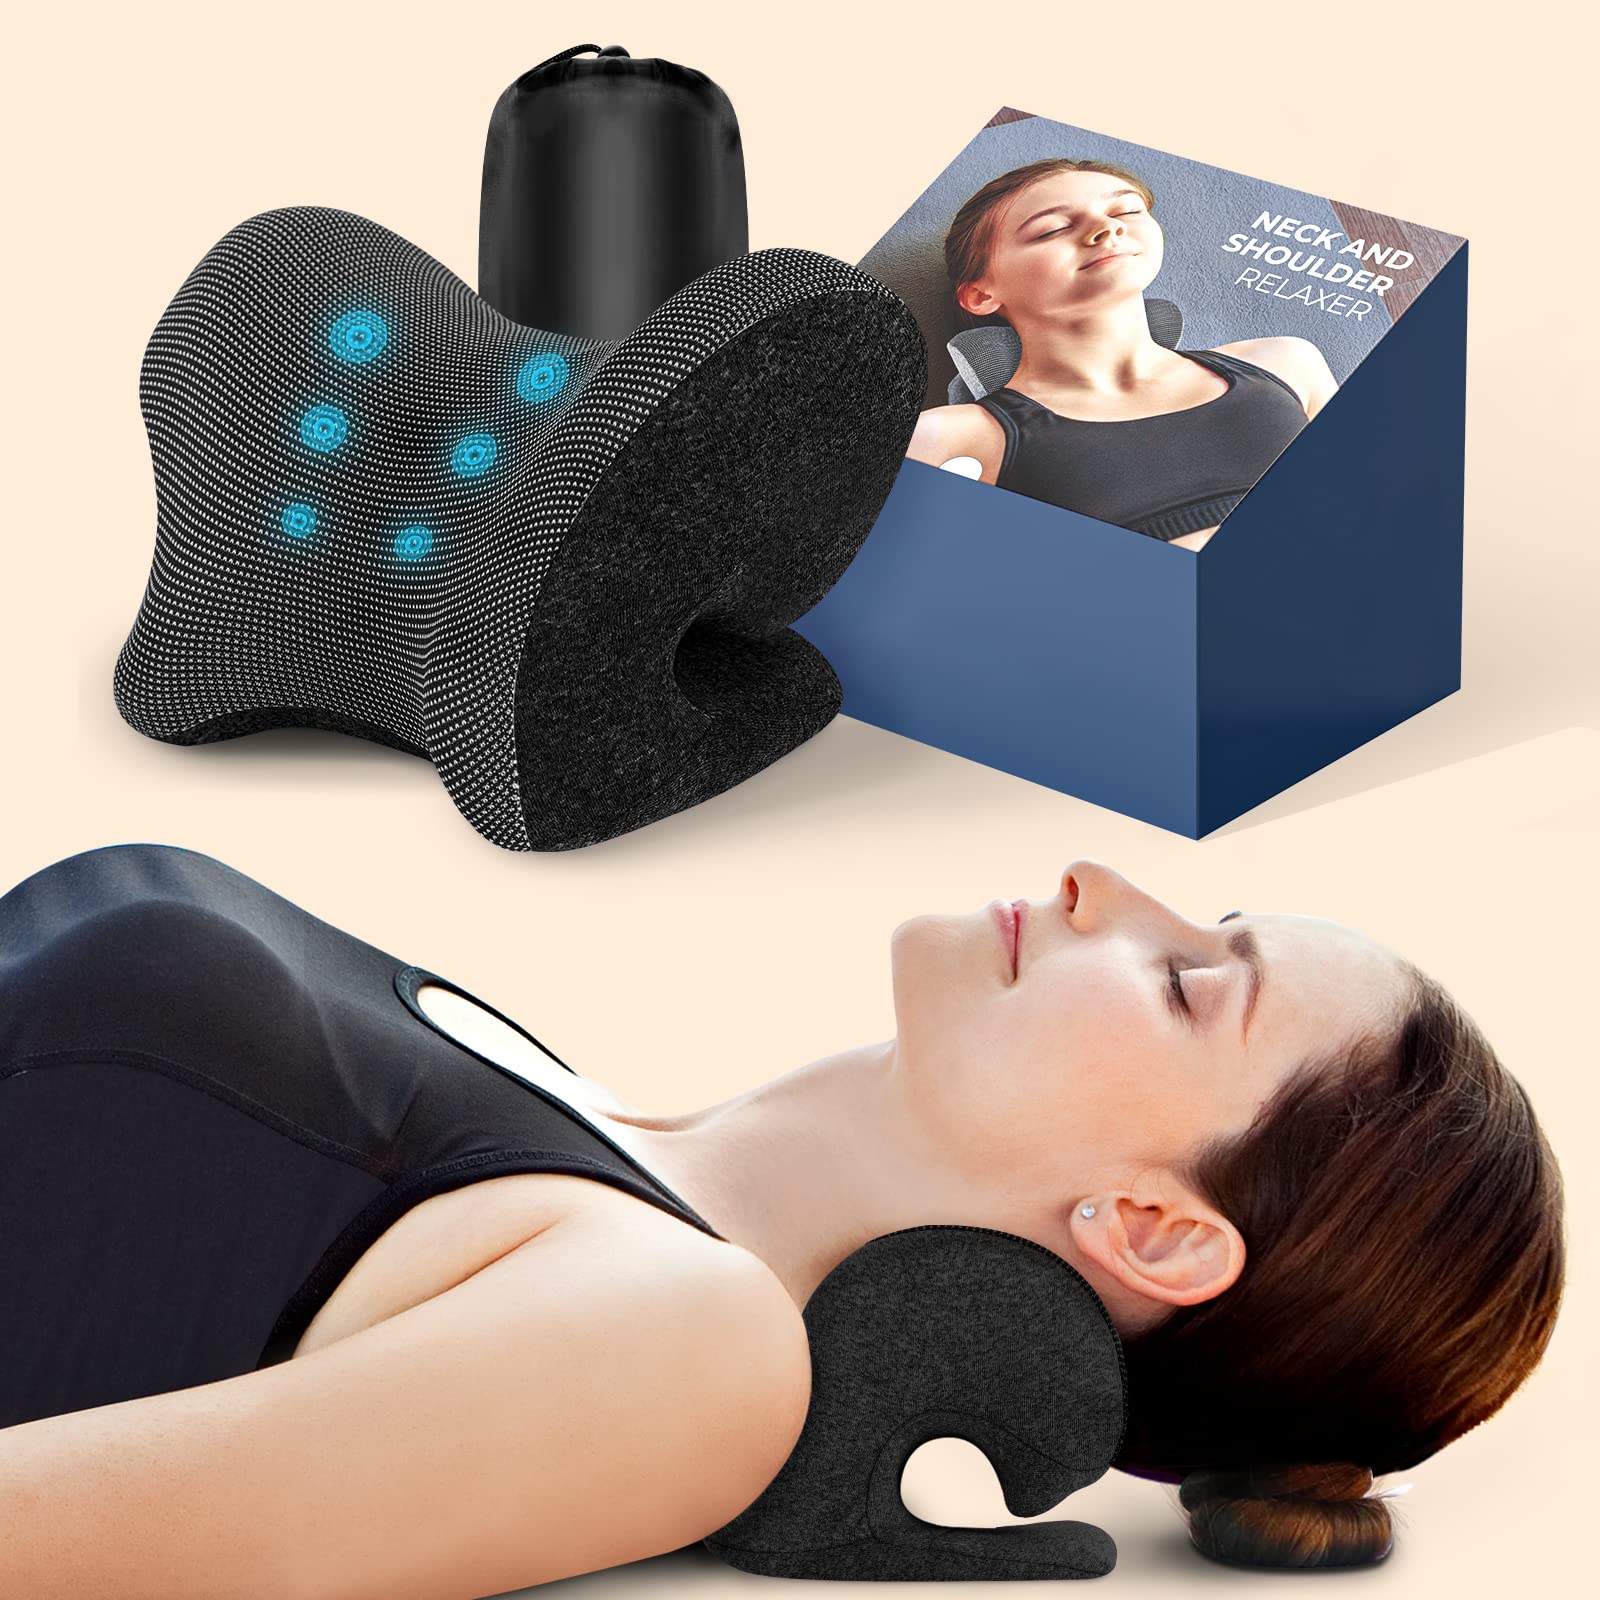 Neck and Shoulder Relaxer - Neck Stretcher Cervical Spine Traction Device  to Relieve Neck and Shoulder Fatigue and Pain, Chiropractic Pillow for